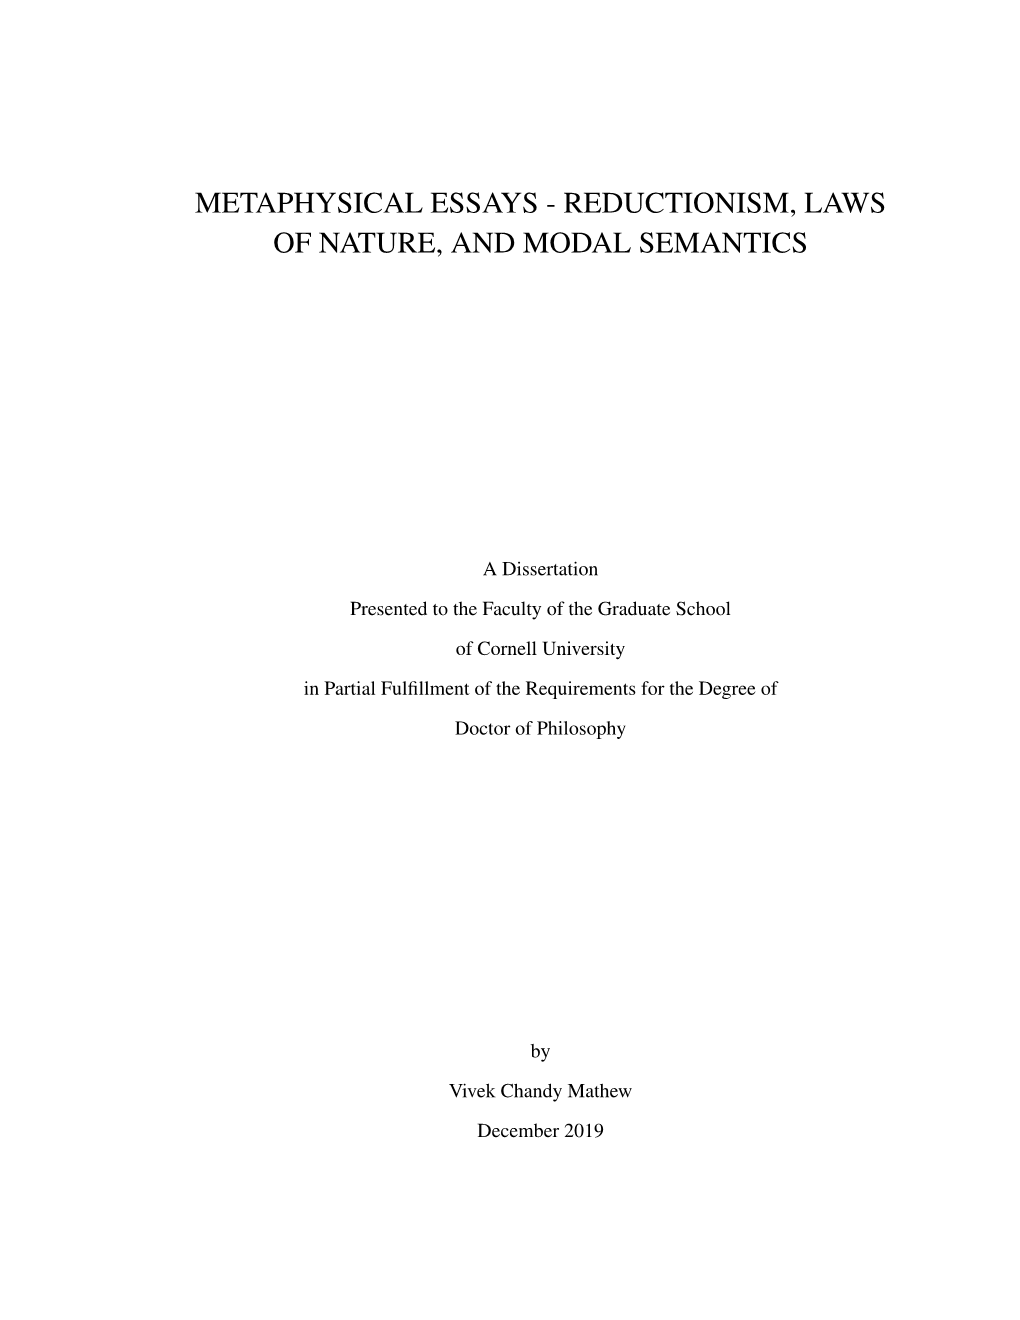 Reductionism, Laws of Nature, and Modal Semantics